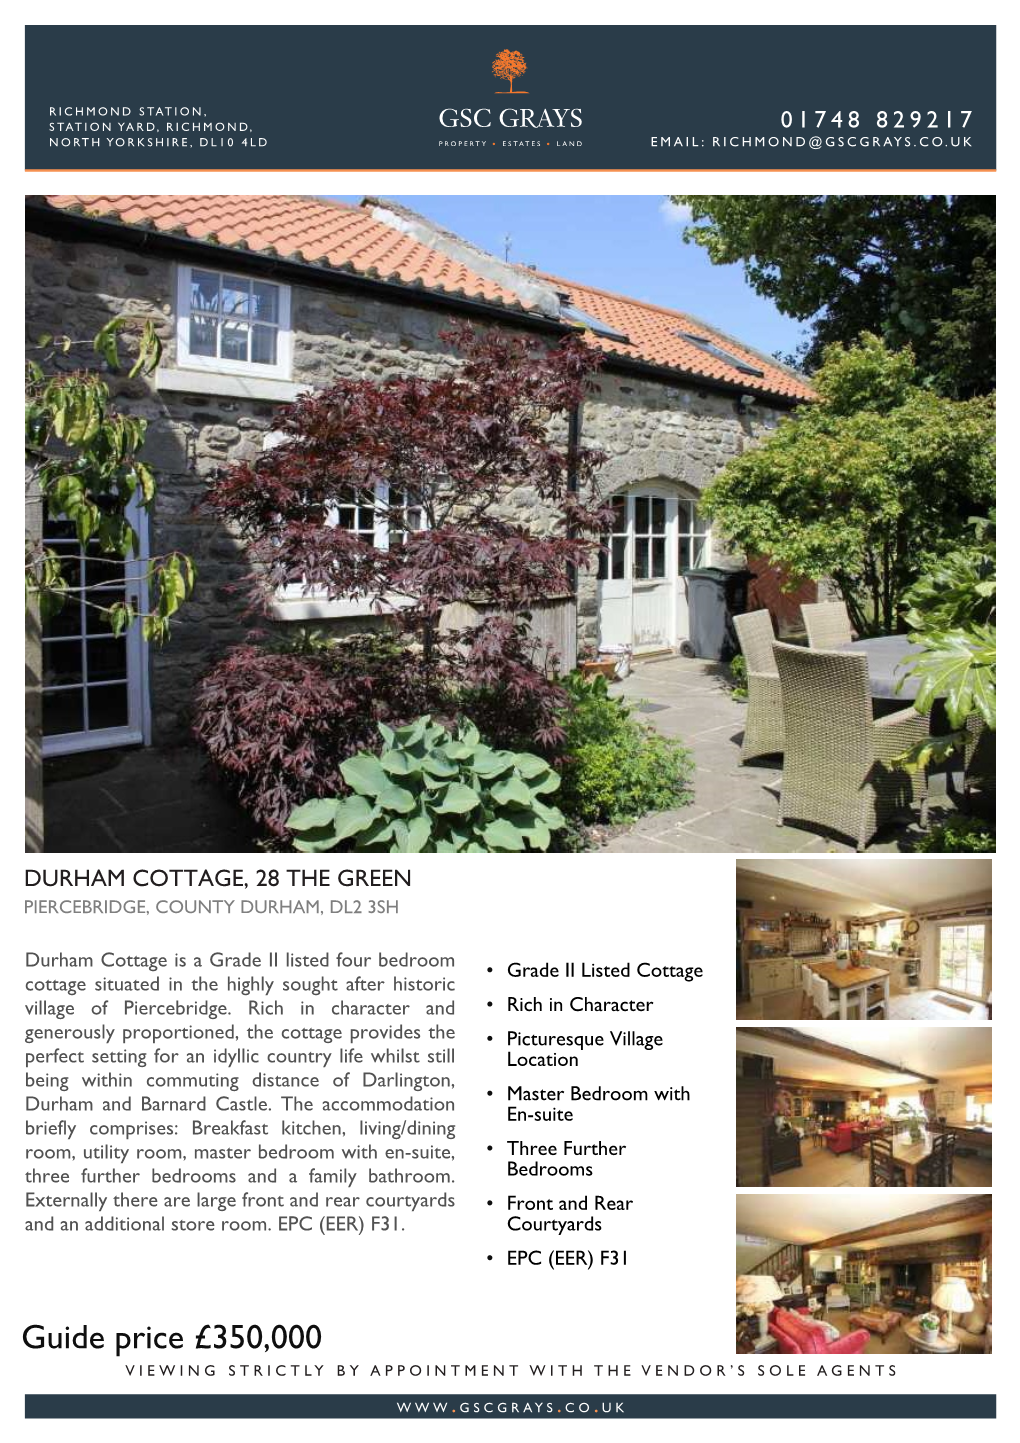 Guide Price £350,000 VIEWING STRICTLY by APPOINTMENT with the VENDOR’S SOLE AGENTS